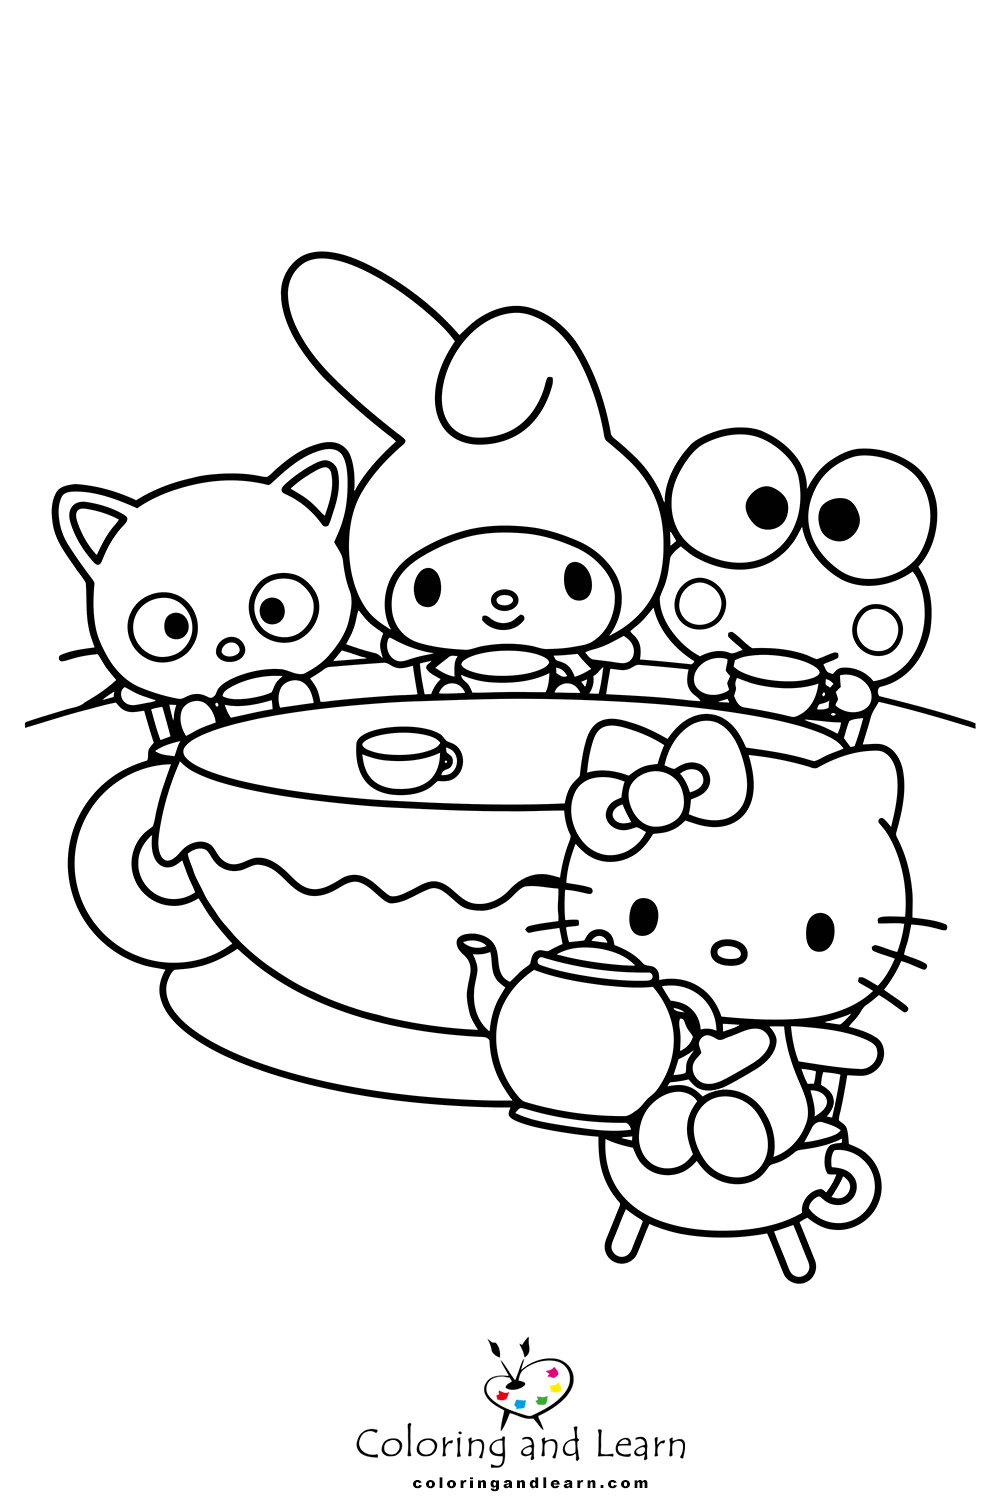 Sanrio coloring pages